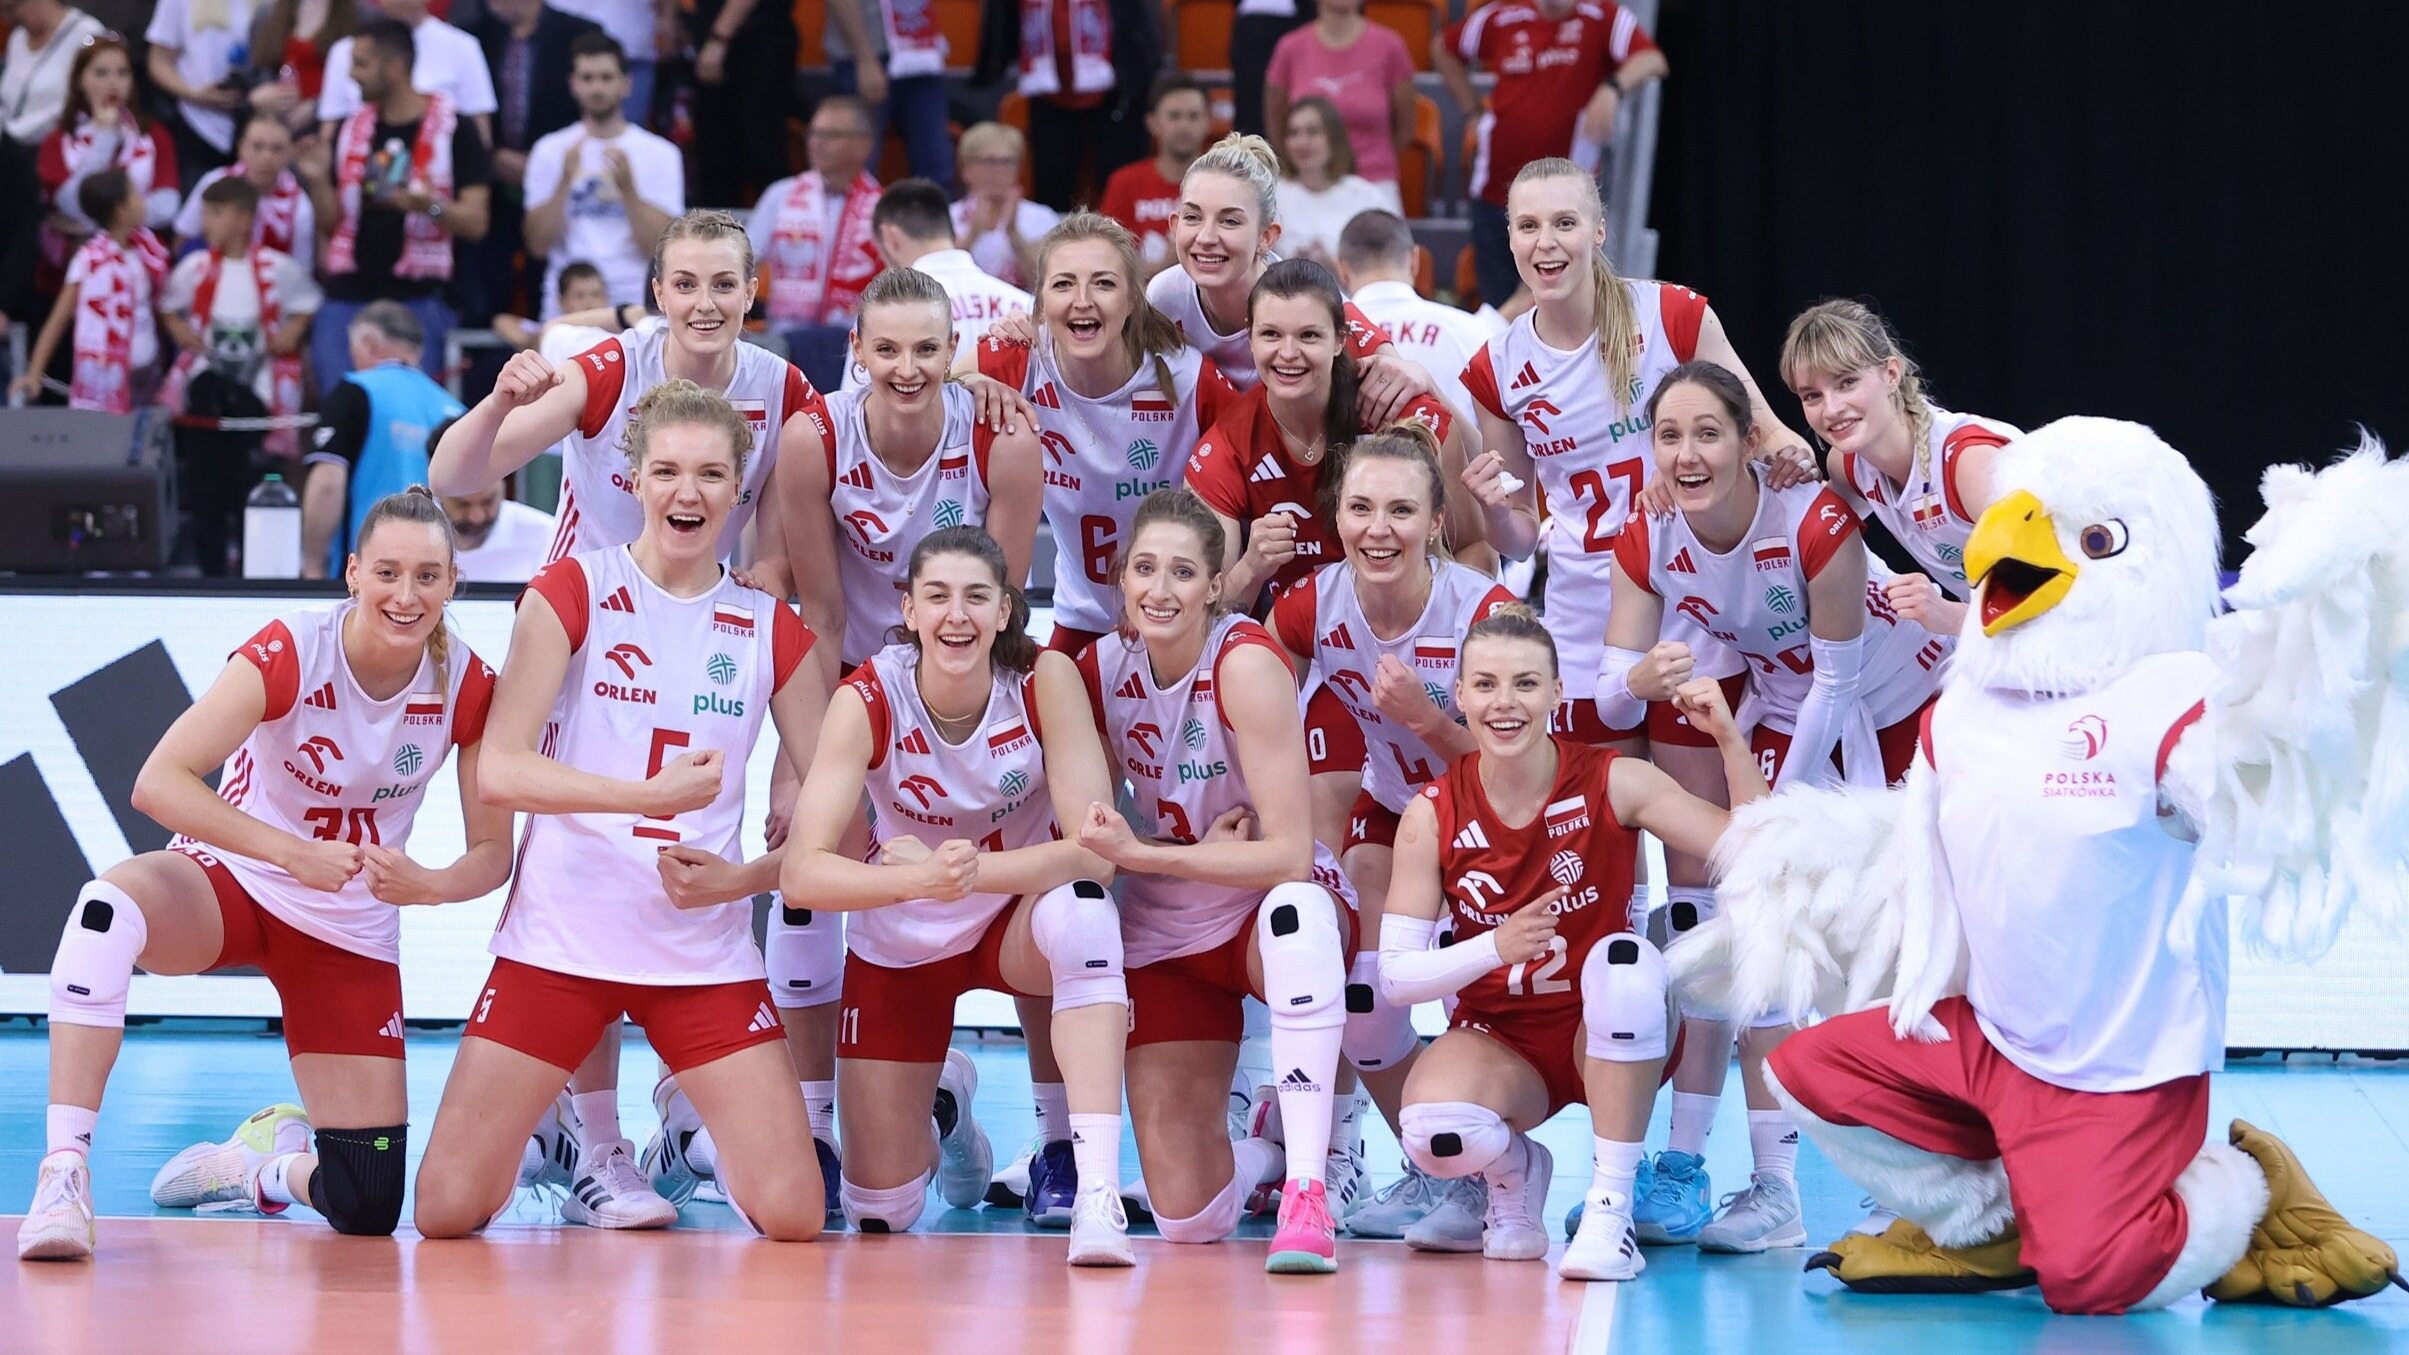 This is what Polish women's competition at the Olympic Games may look like.  Group of death or dreams?